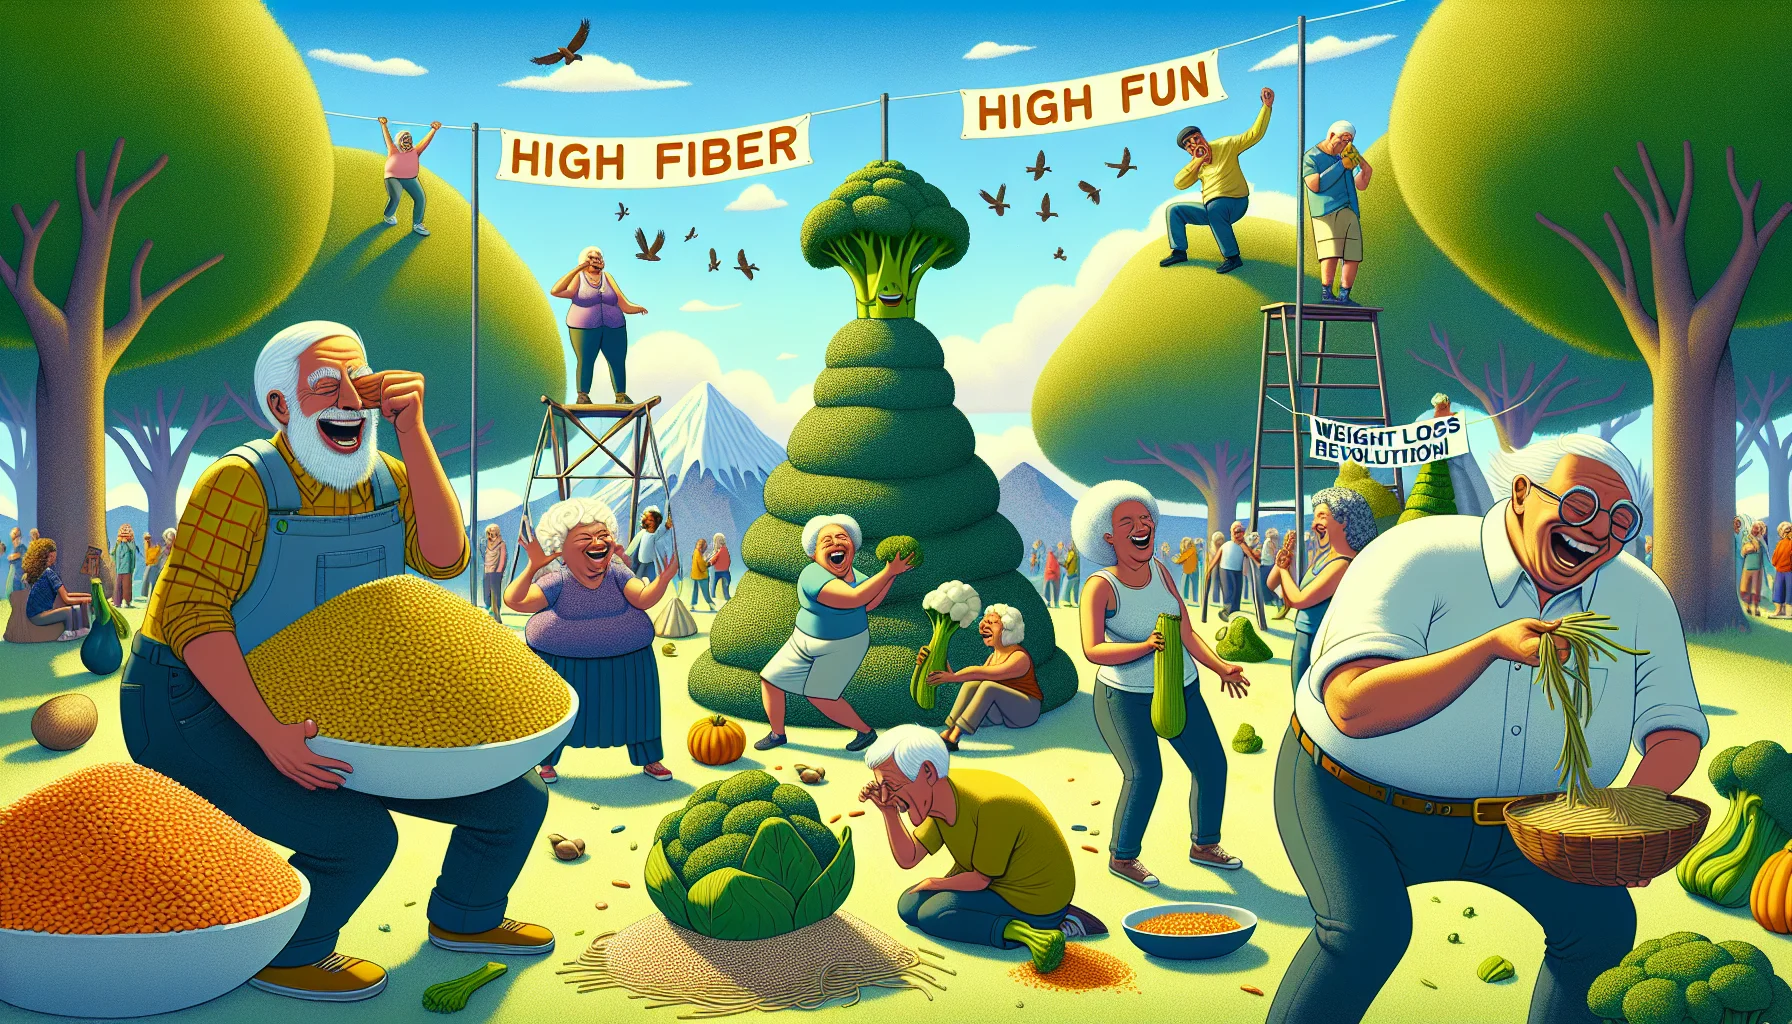 Imagine a comedic scene in a lush park where a group of elderlies, diverse in gender and ethnicities, are gathered for a 'Fiber-rich Food Festival'. There's a Caucasian male setting up a banner saying 'High Fiber, High Fun', an Hispanic female laughing while balancing broccoli on her nose, and a Black male struggling with an odd-shaped butternut squash. A nearby artwork stands, embodying foods high in fiber: An amusing high mountain of lentils, surrounded by a river of whole-grain pasta, with trees made of artichokes. The sky is blue, with a banner towed by birds, reading 'Weight Loss Revolution'.